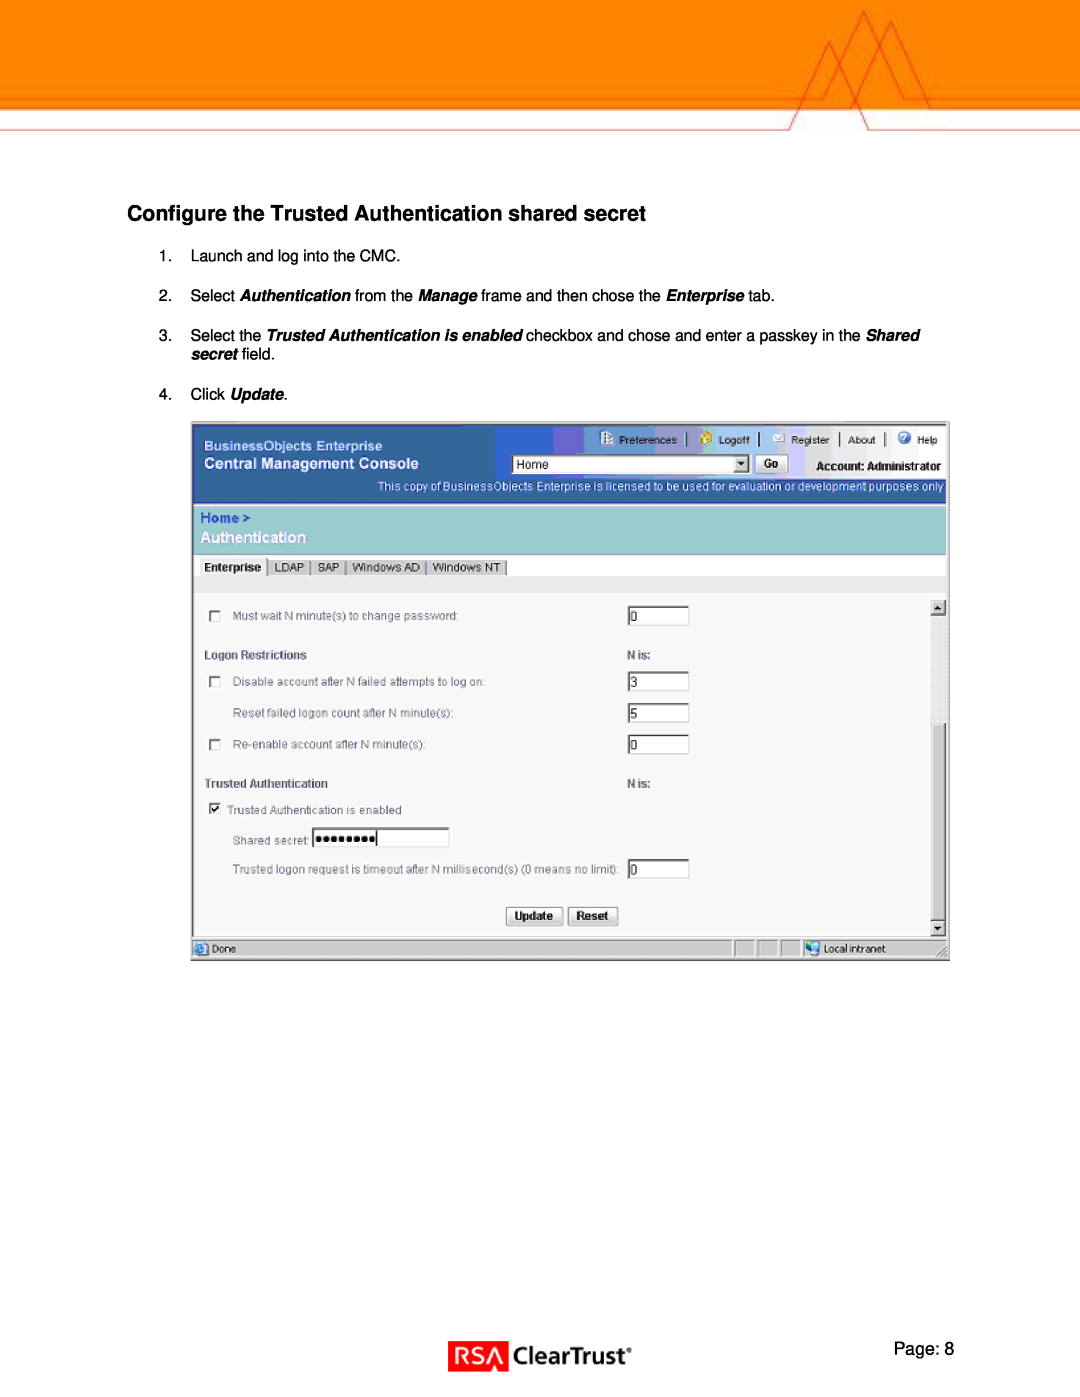 RSA Security Xlr2 manual Configure the Trusted Authentication shared secret, Launch and log into the CMC, Click Update 